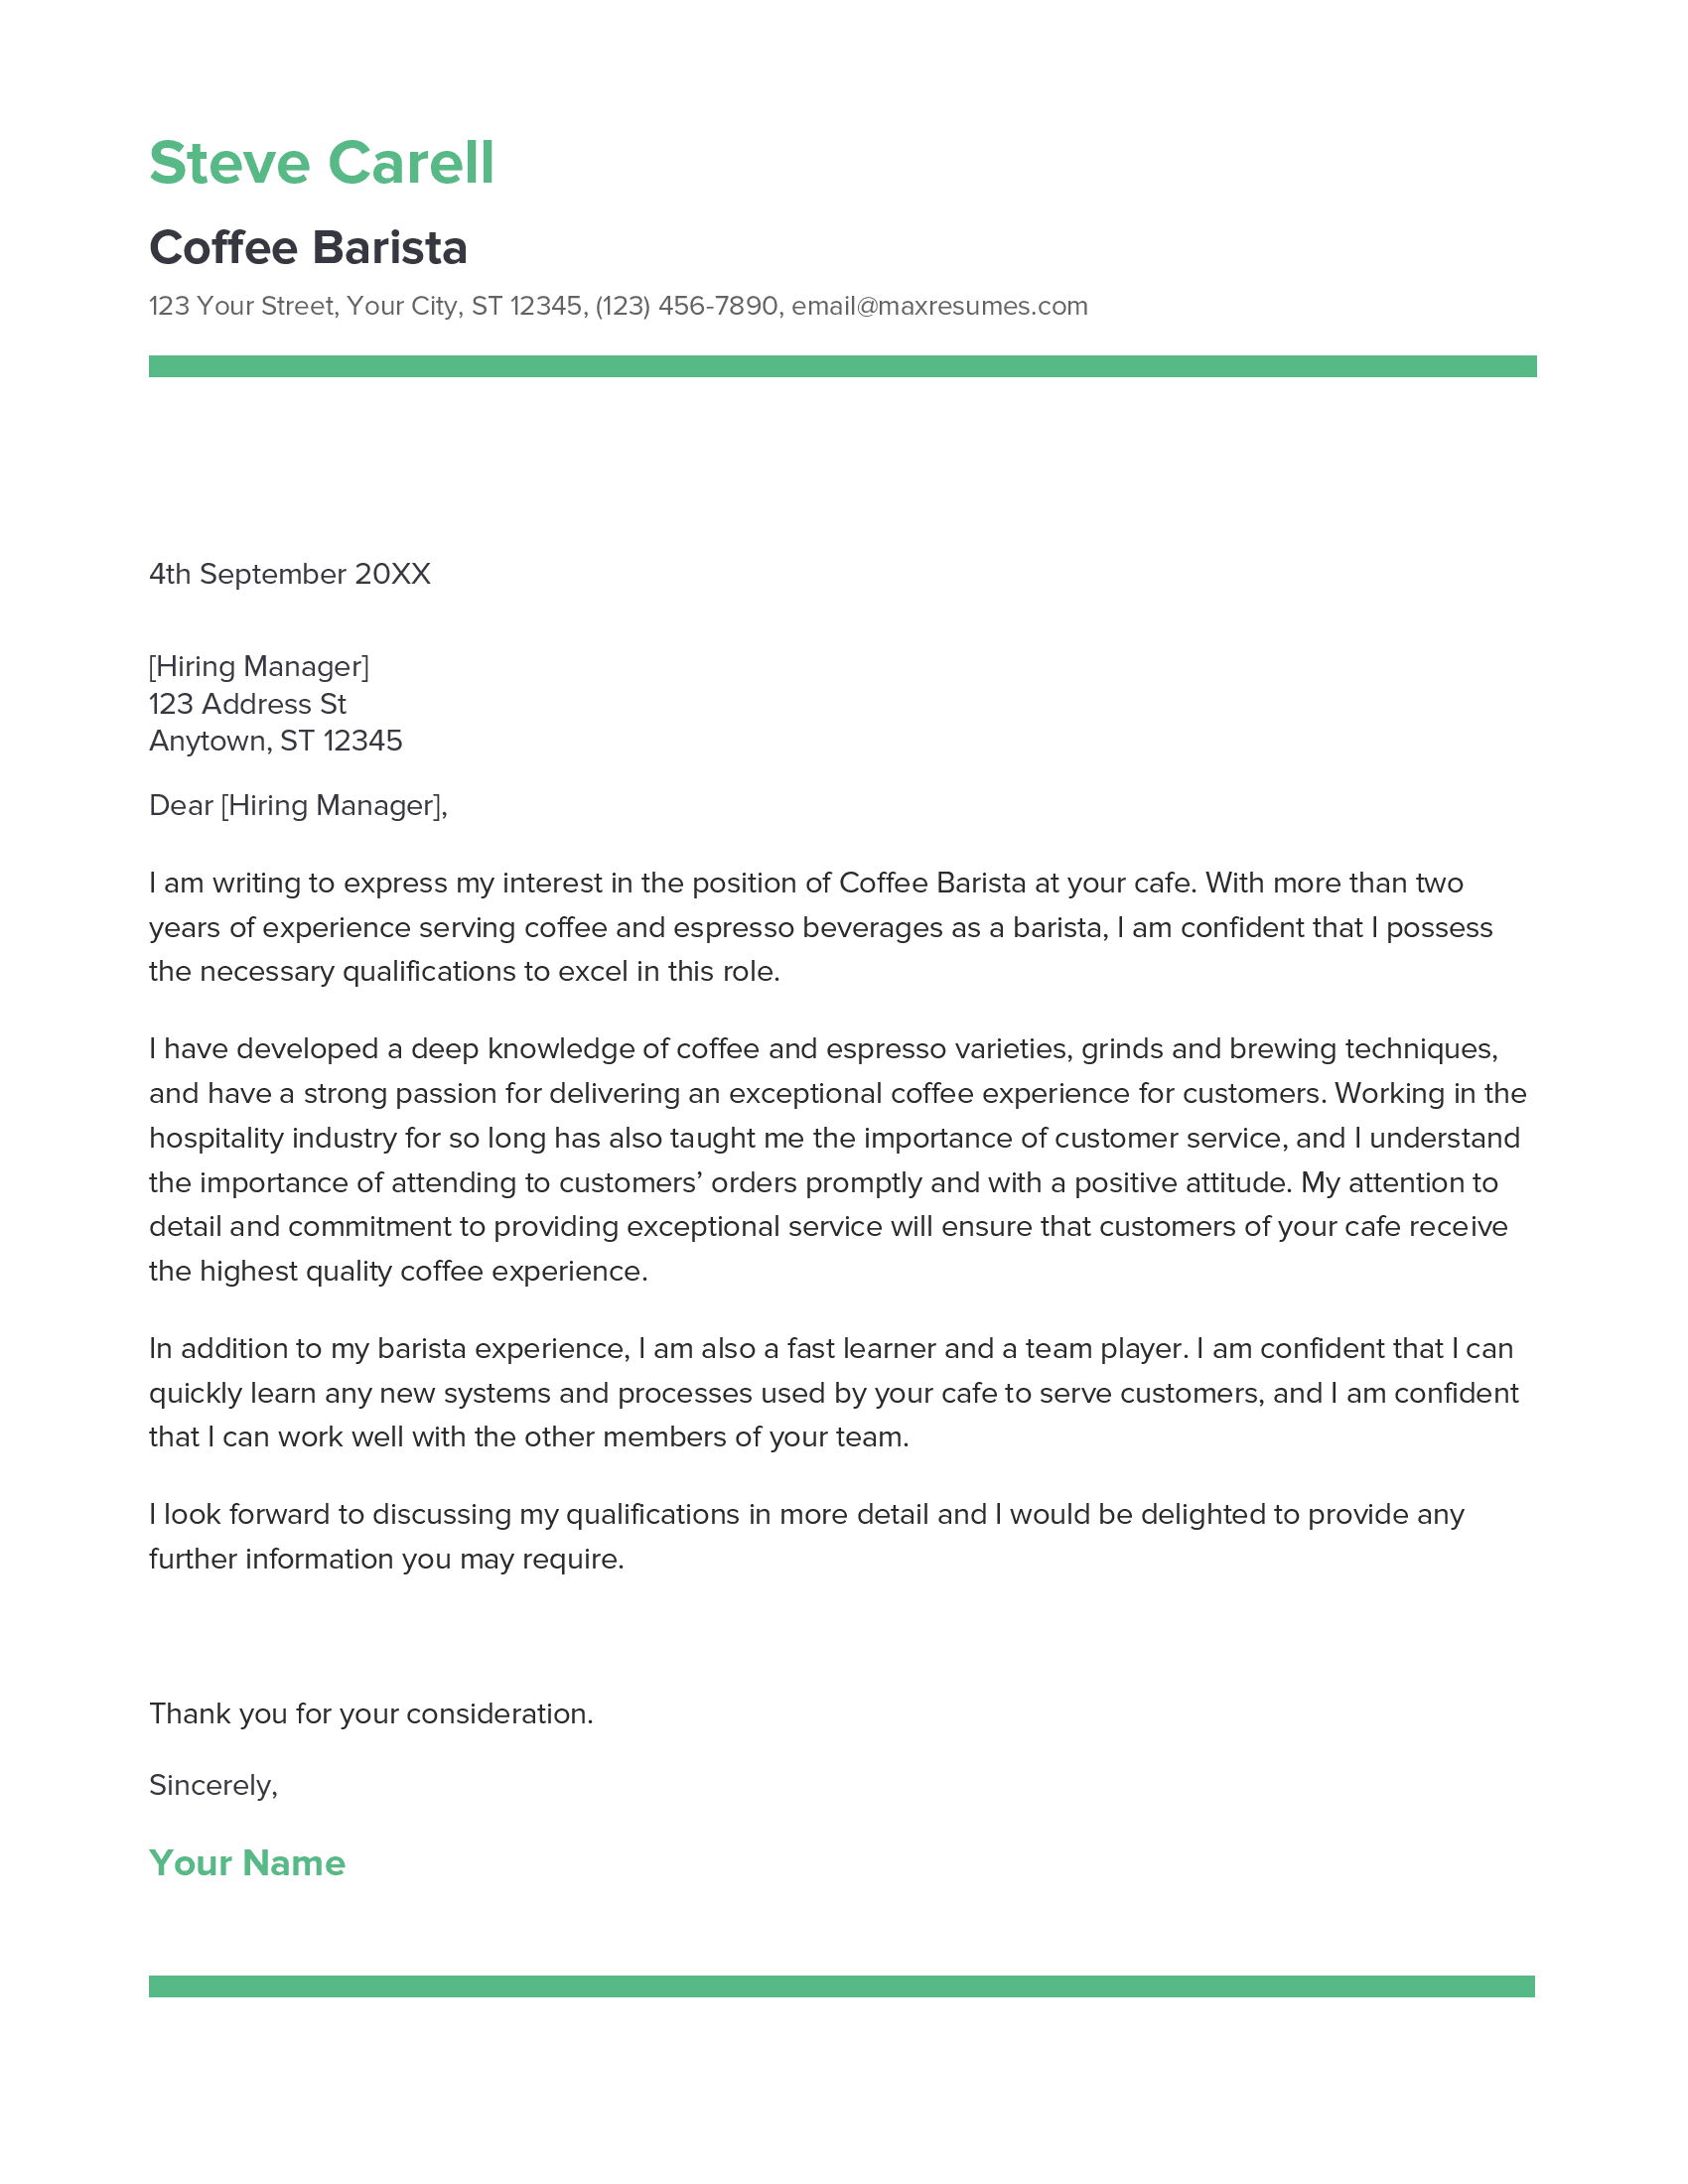 Coffee Barista Cover Letter Example